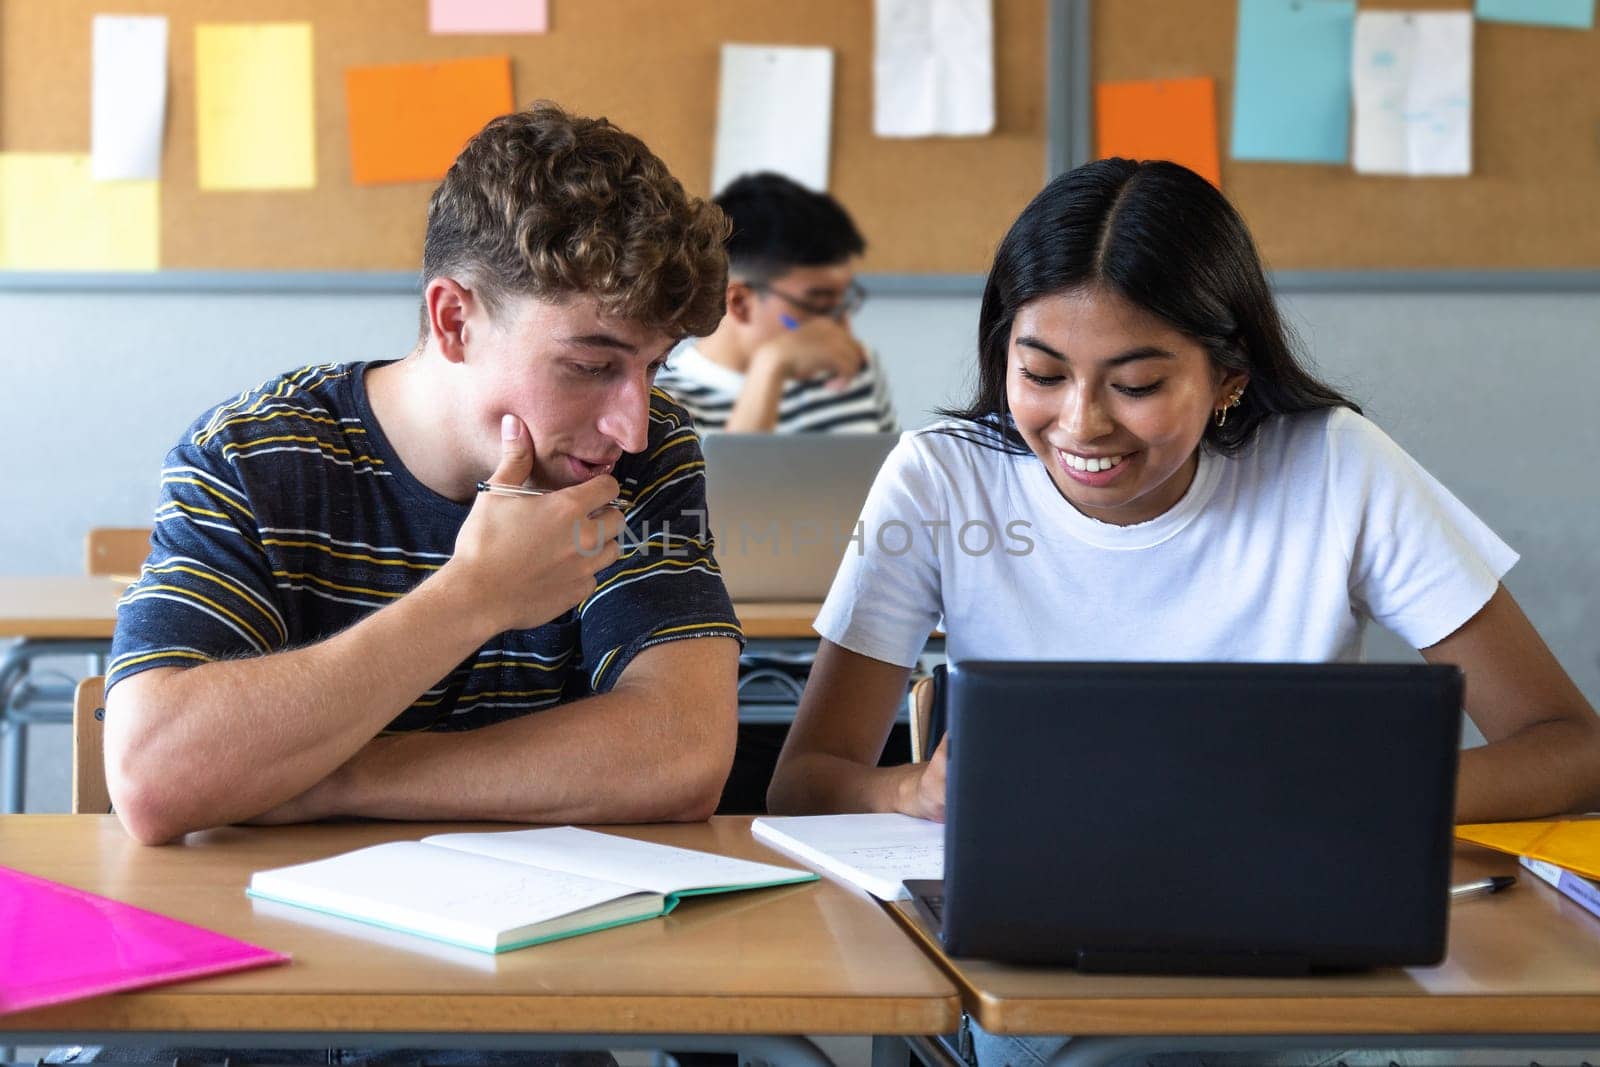 Caucasian teen boy and native american teenage female high school students in class working together on school project using laptop. Education concept.